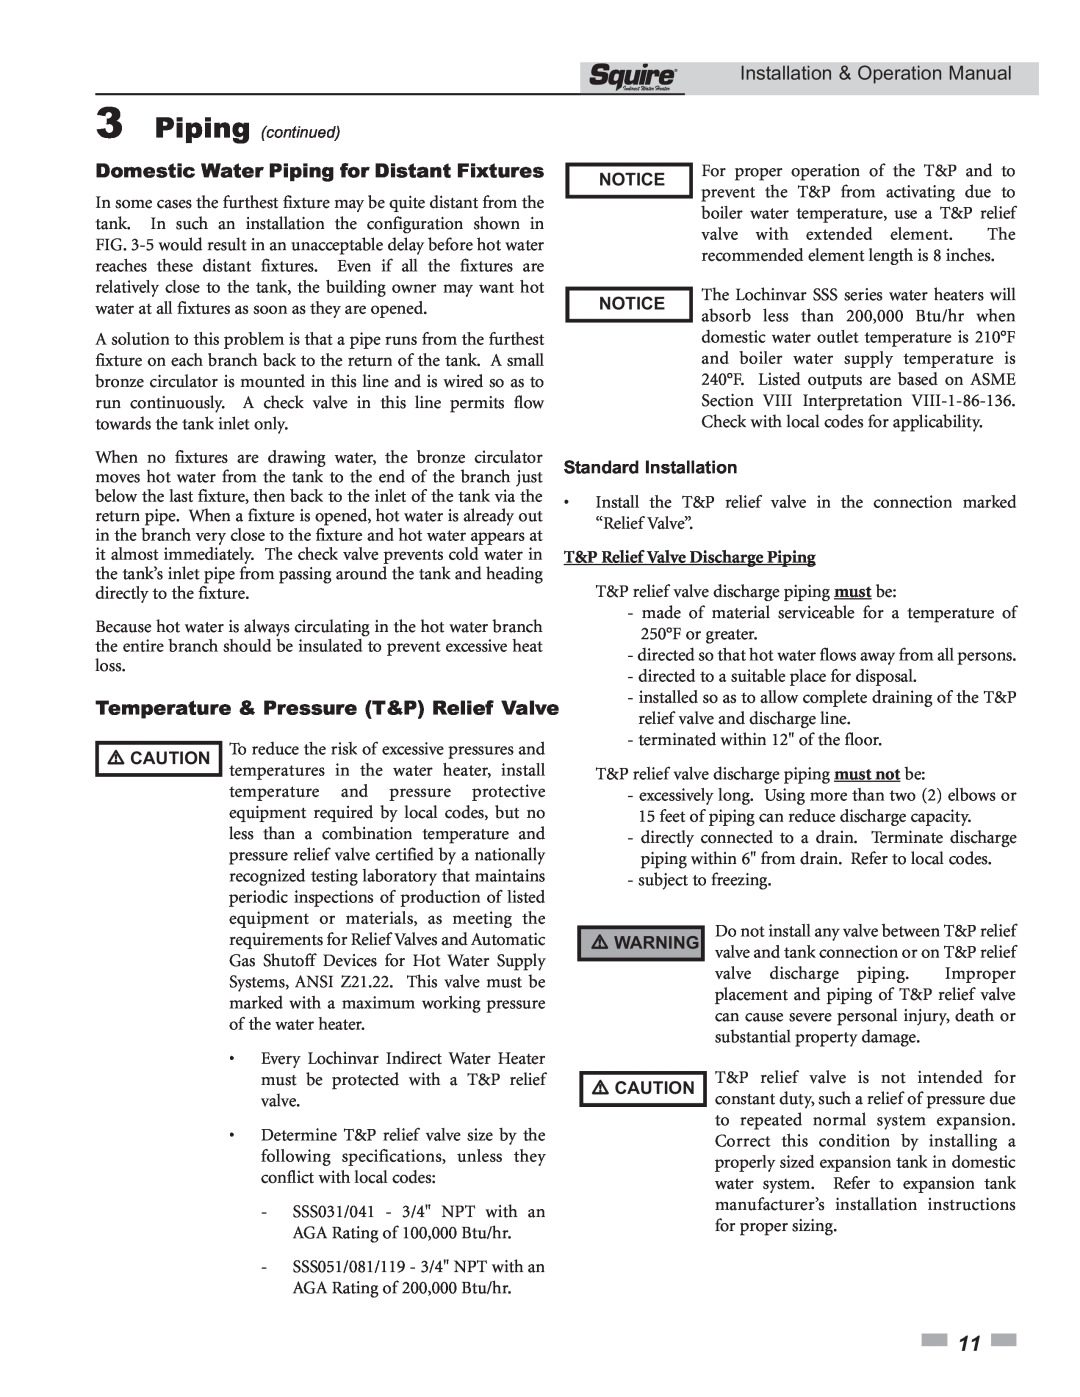 Lochinvar SSS03 Domestic Water Piping for Distant Fixtures, Temperature & Pressure T&P Relief Valve, Notice Notice 